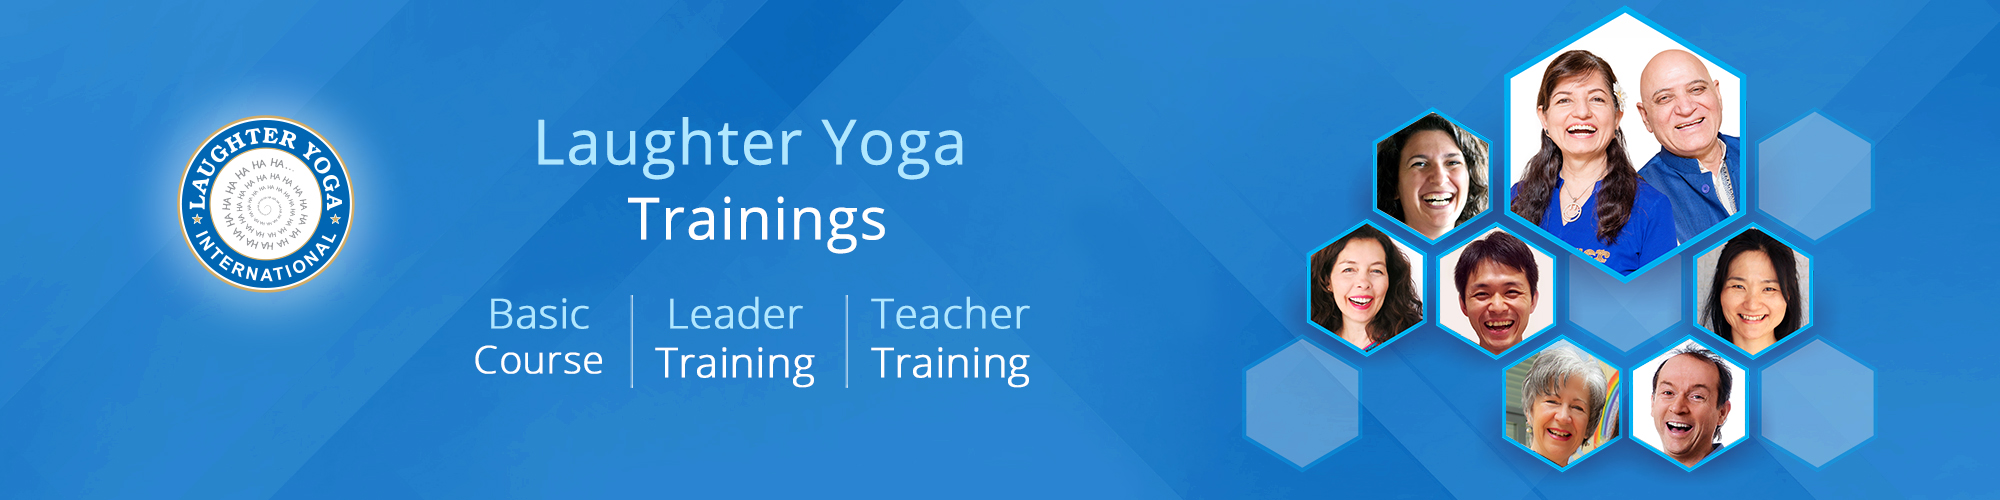 about-trainings-laughter-yoga-international